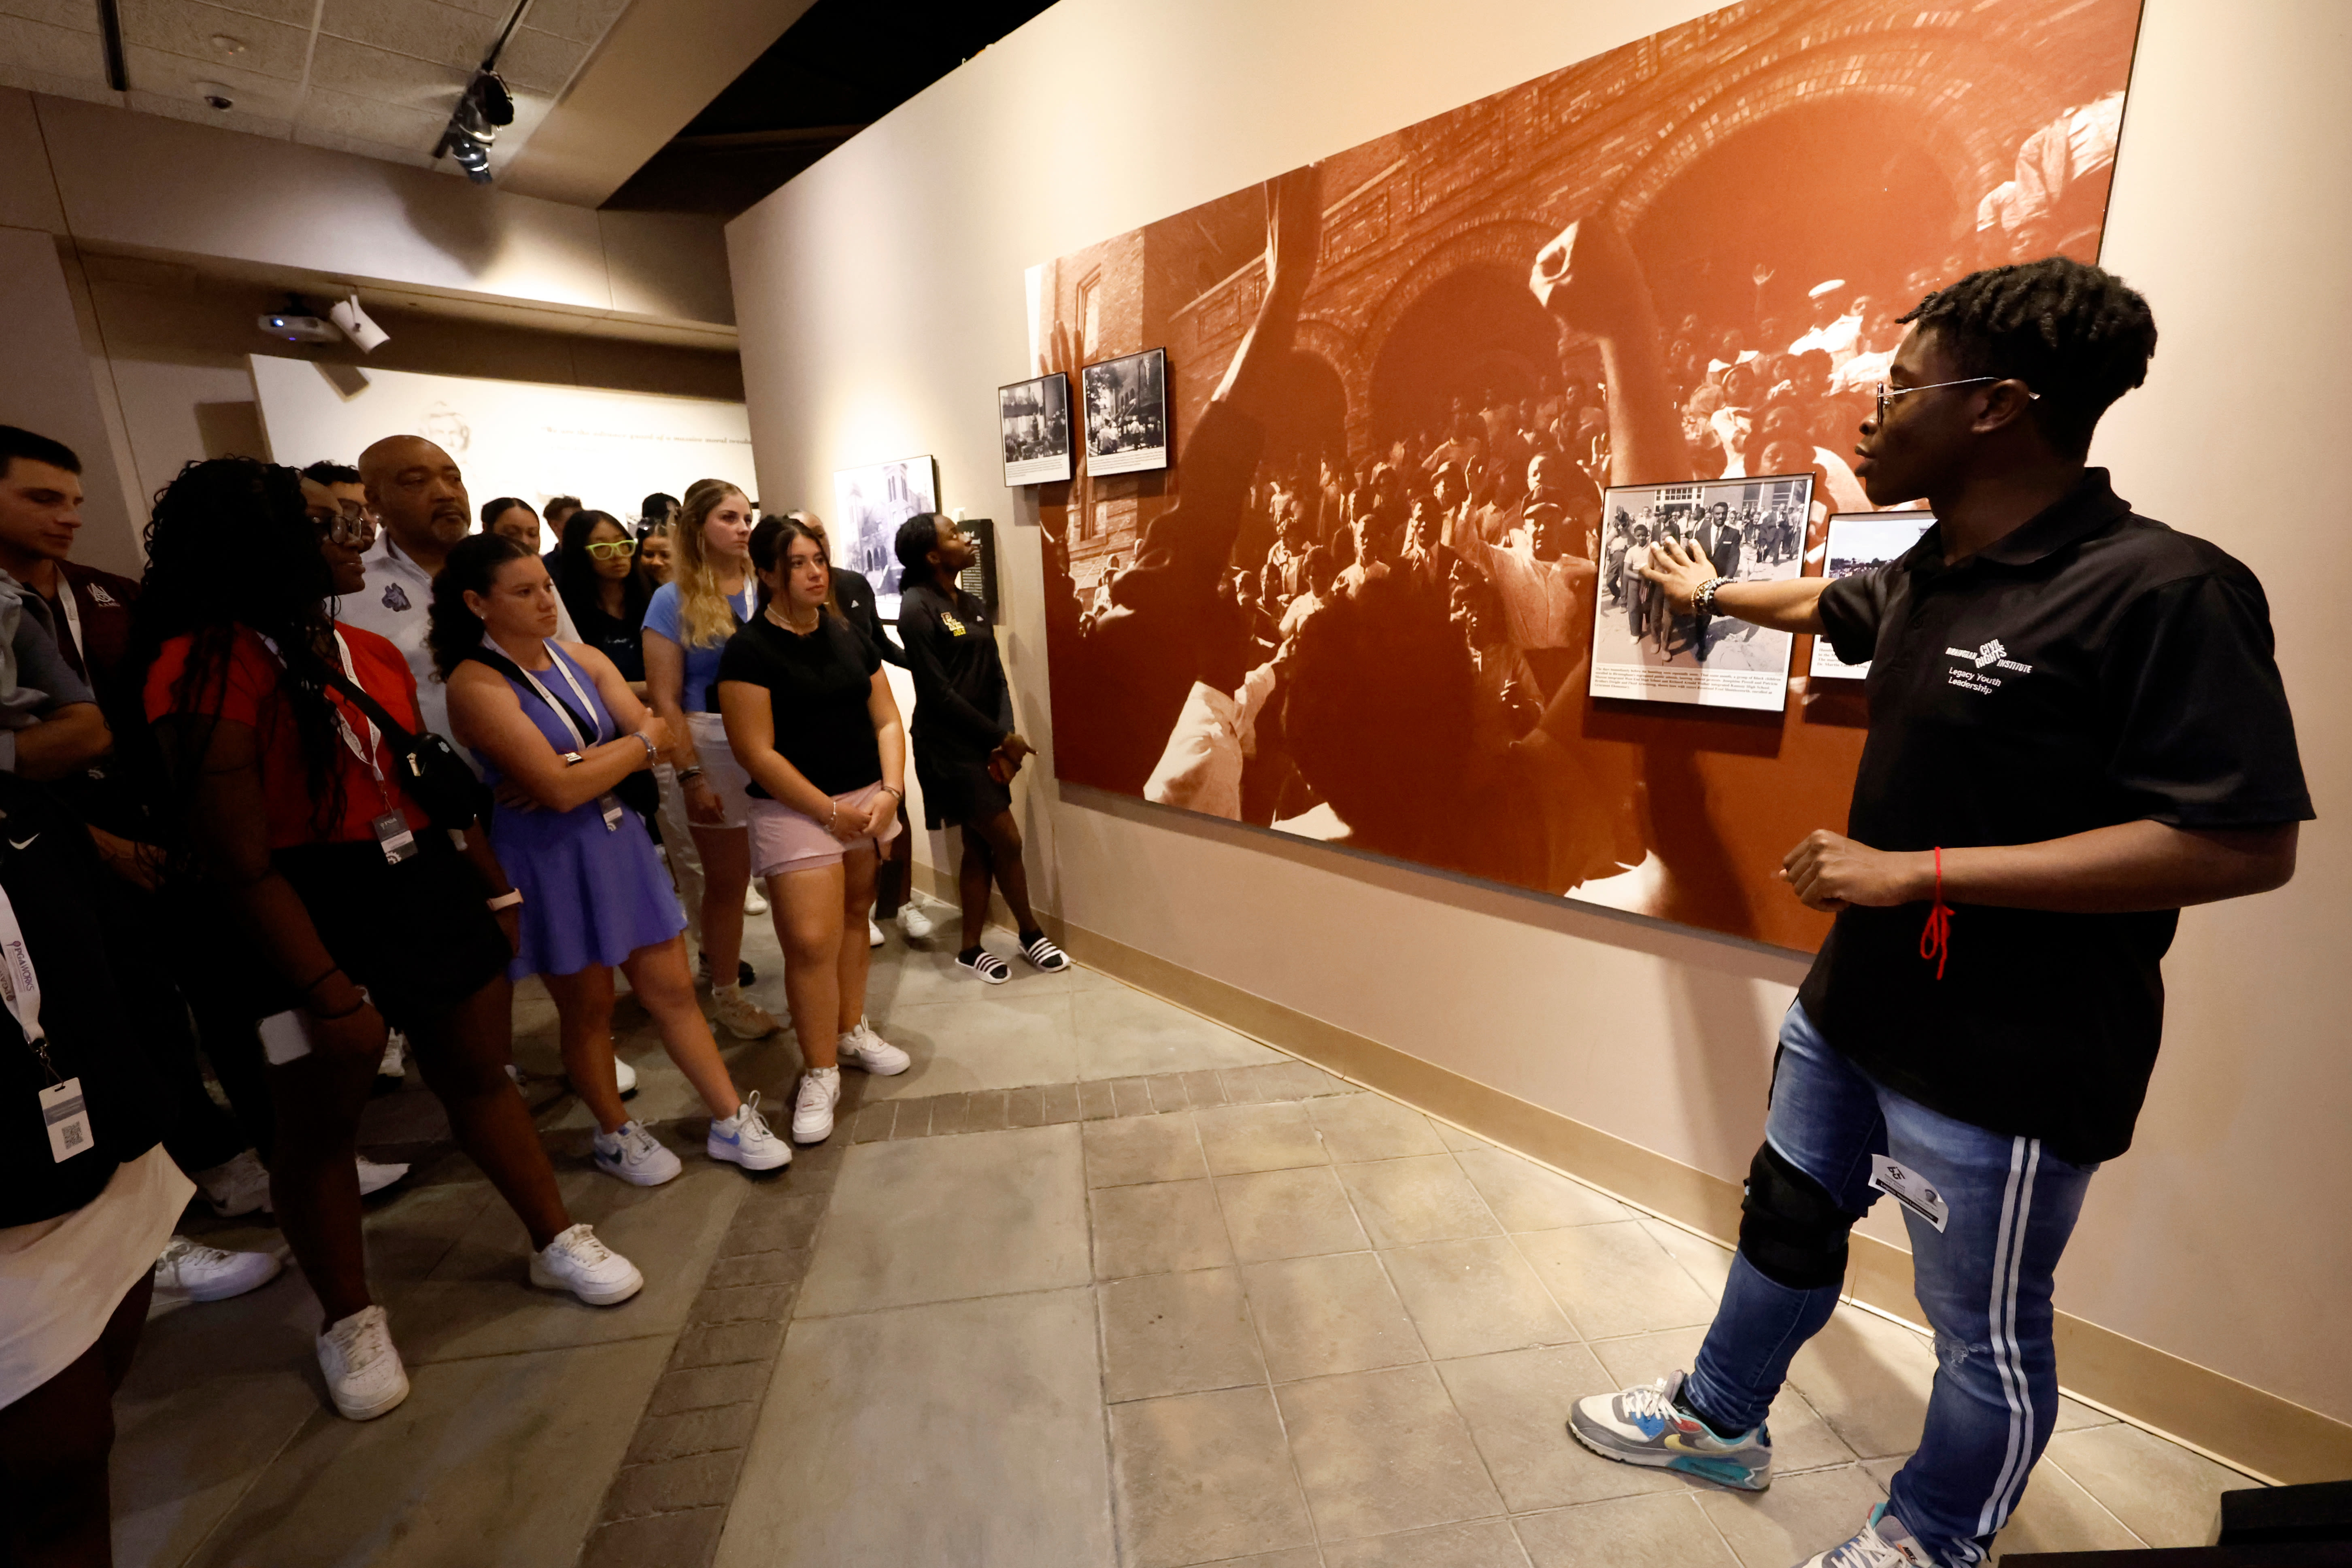 The Birmingham Experience allowed PWCC competitors to take a deep dive into the history of the city.